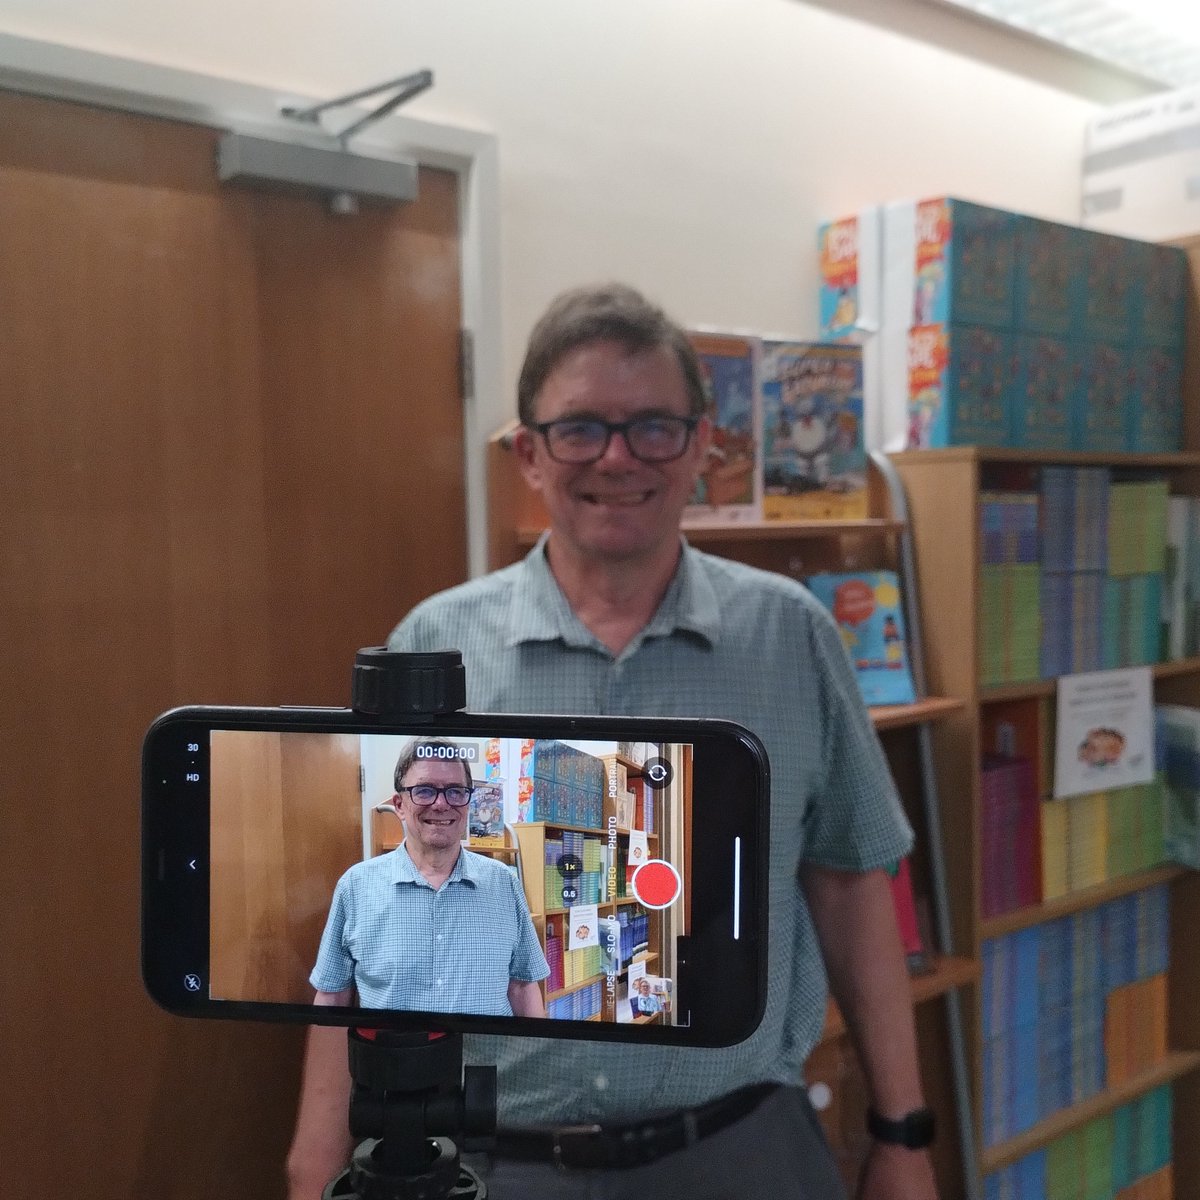 This morning, Cllr Adam Price, Portfolio Holder for Children's Services, was caught in our Child-Friendly Medway office filming something very exciting!😀

What do you think it could be?

#ChildFriendlyMedway #OneMinuteMedway